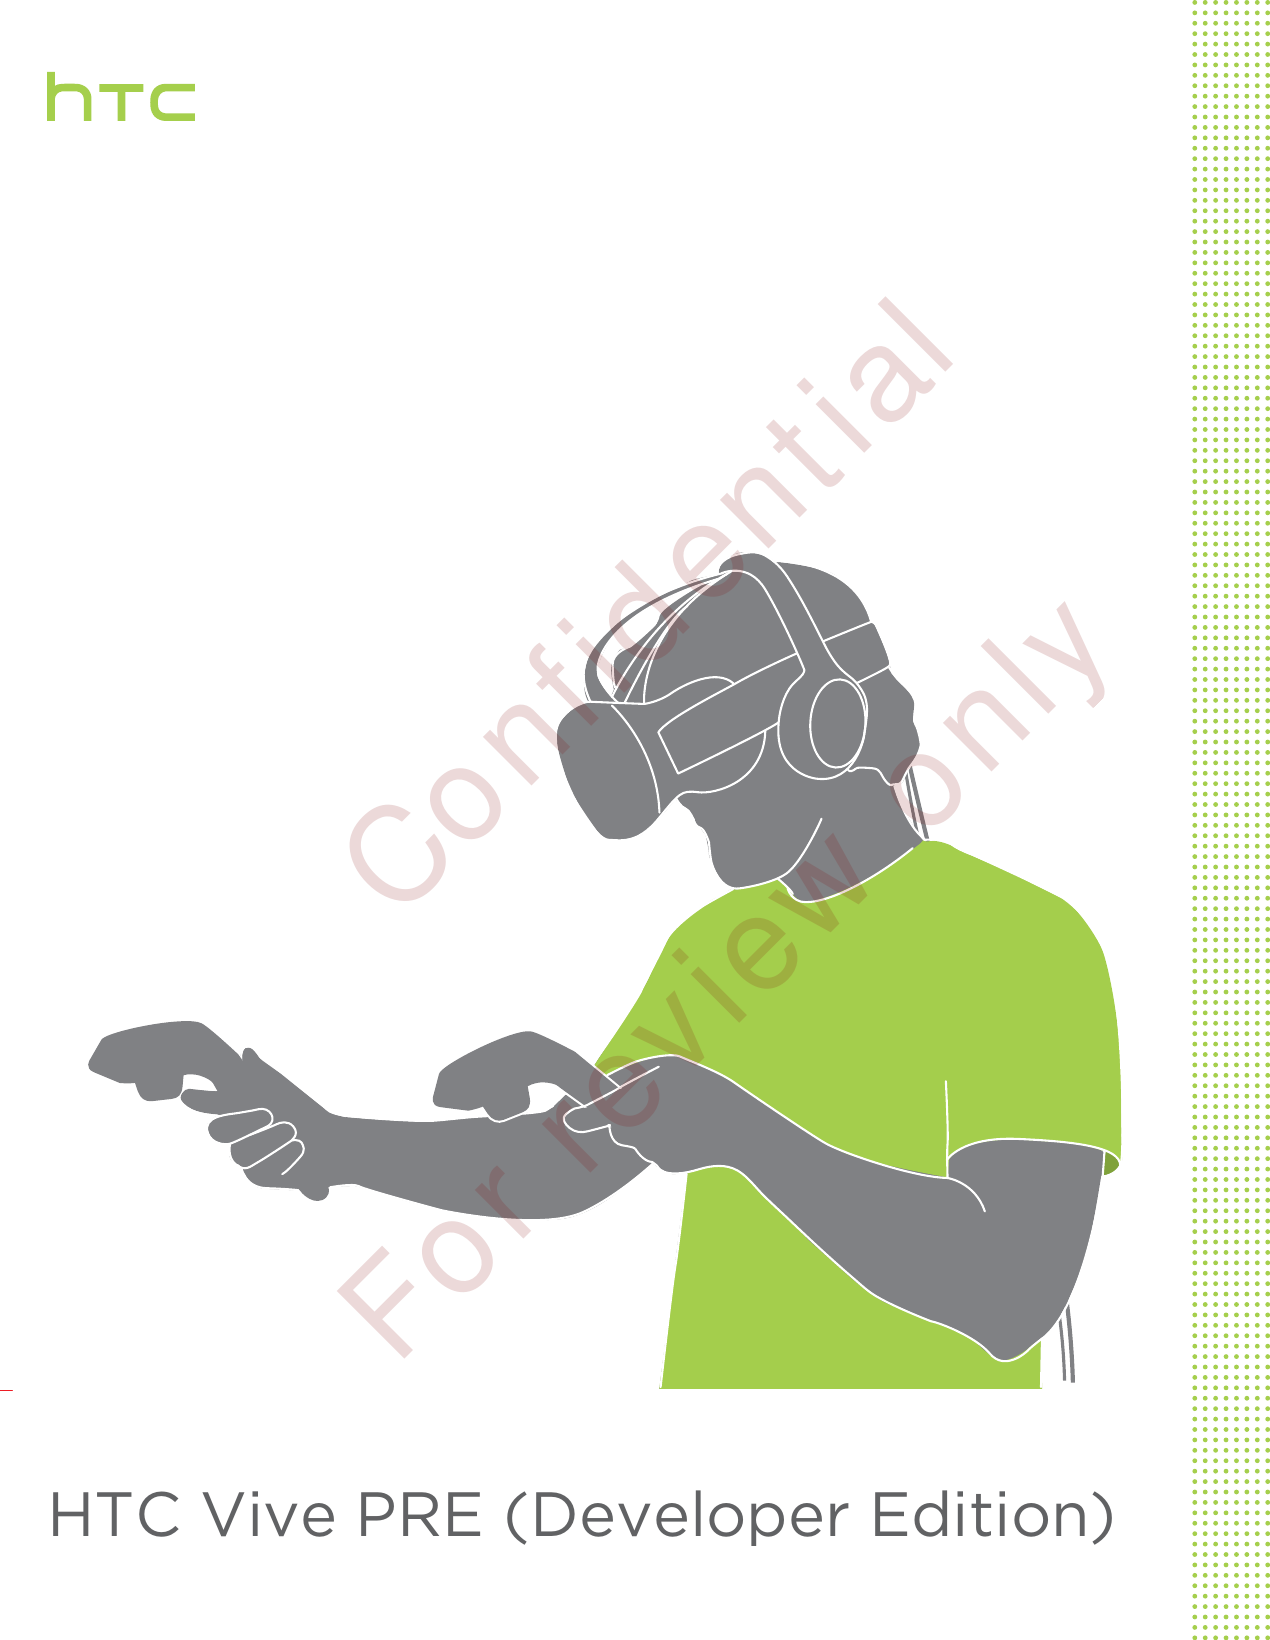 HTC Vive PRE (Developer Edition)        Confidential  For review only